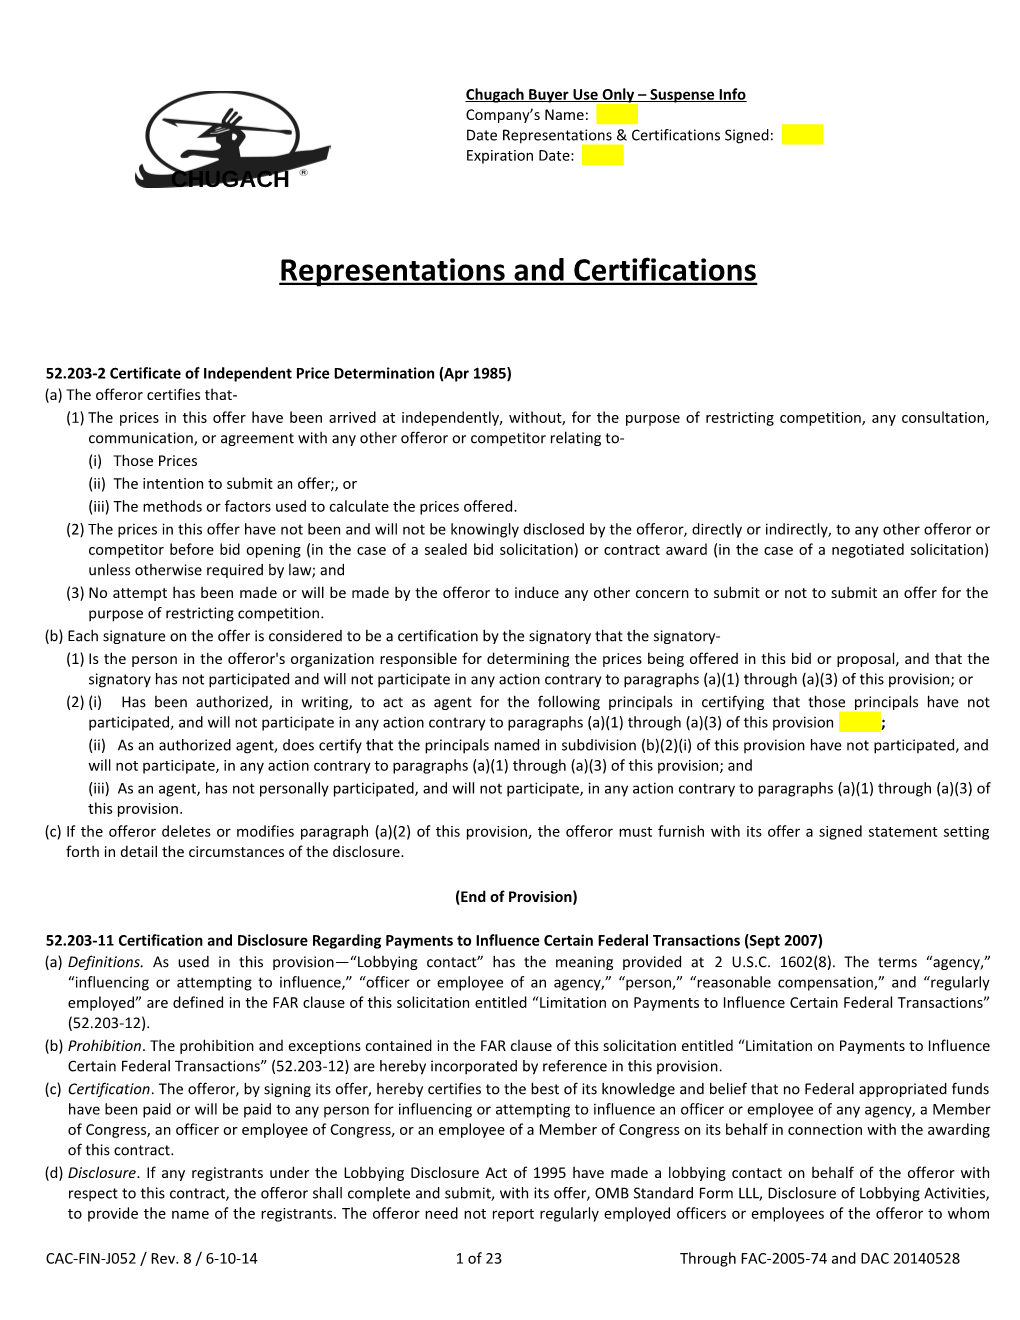 Date Representations & Certifications Signed